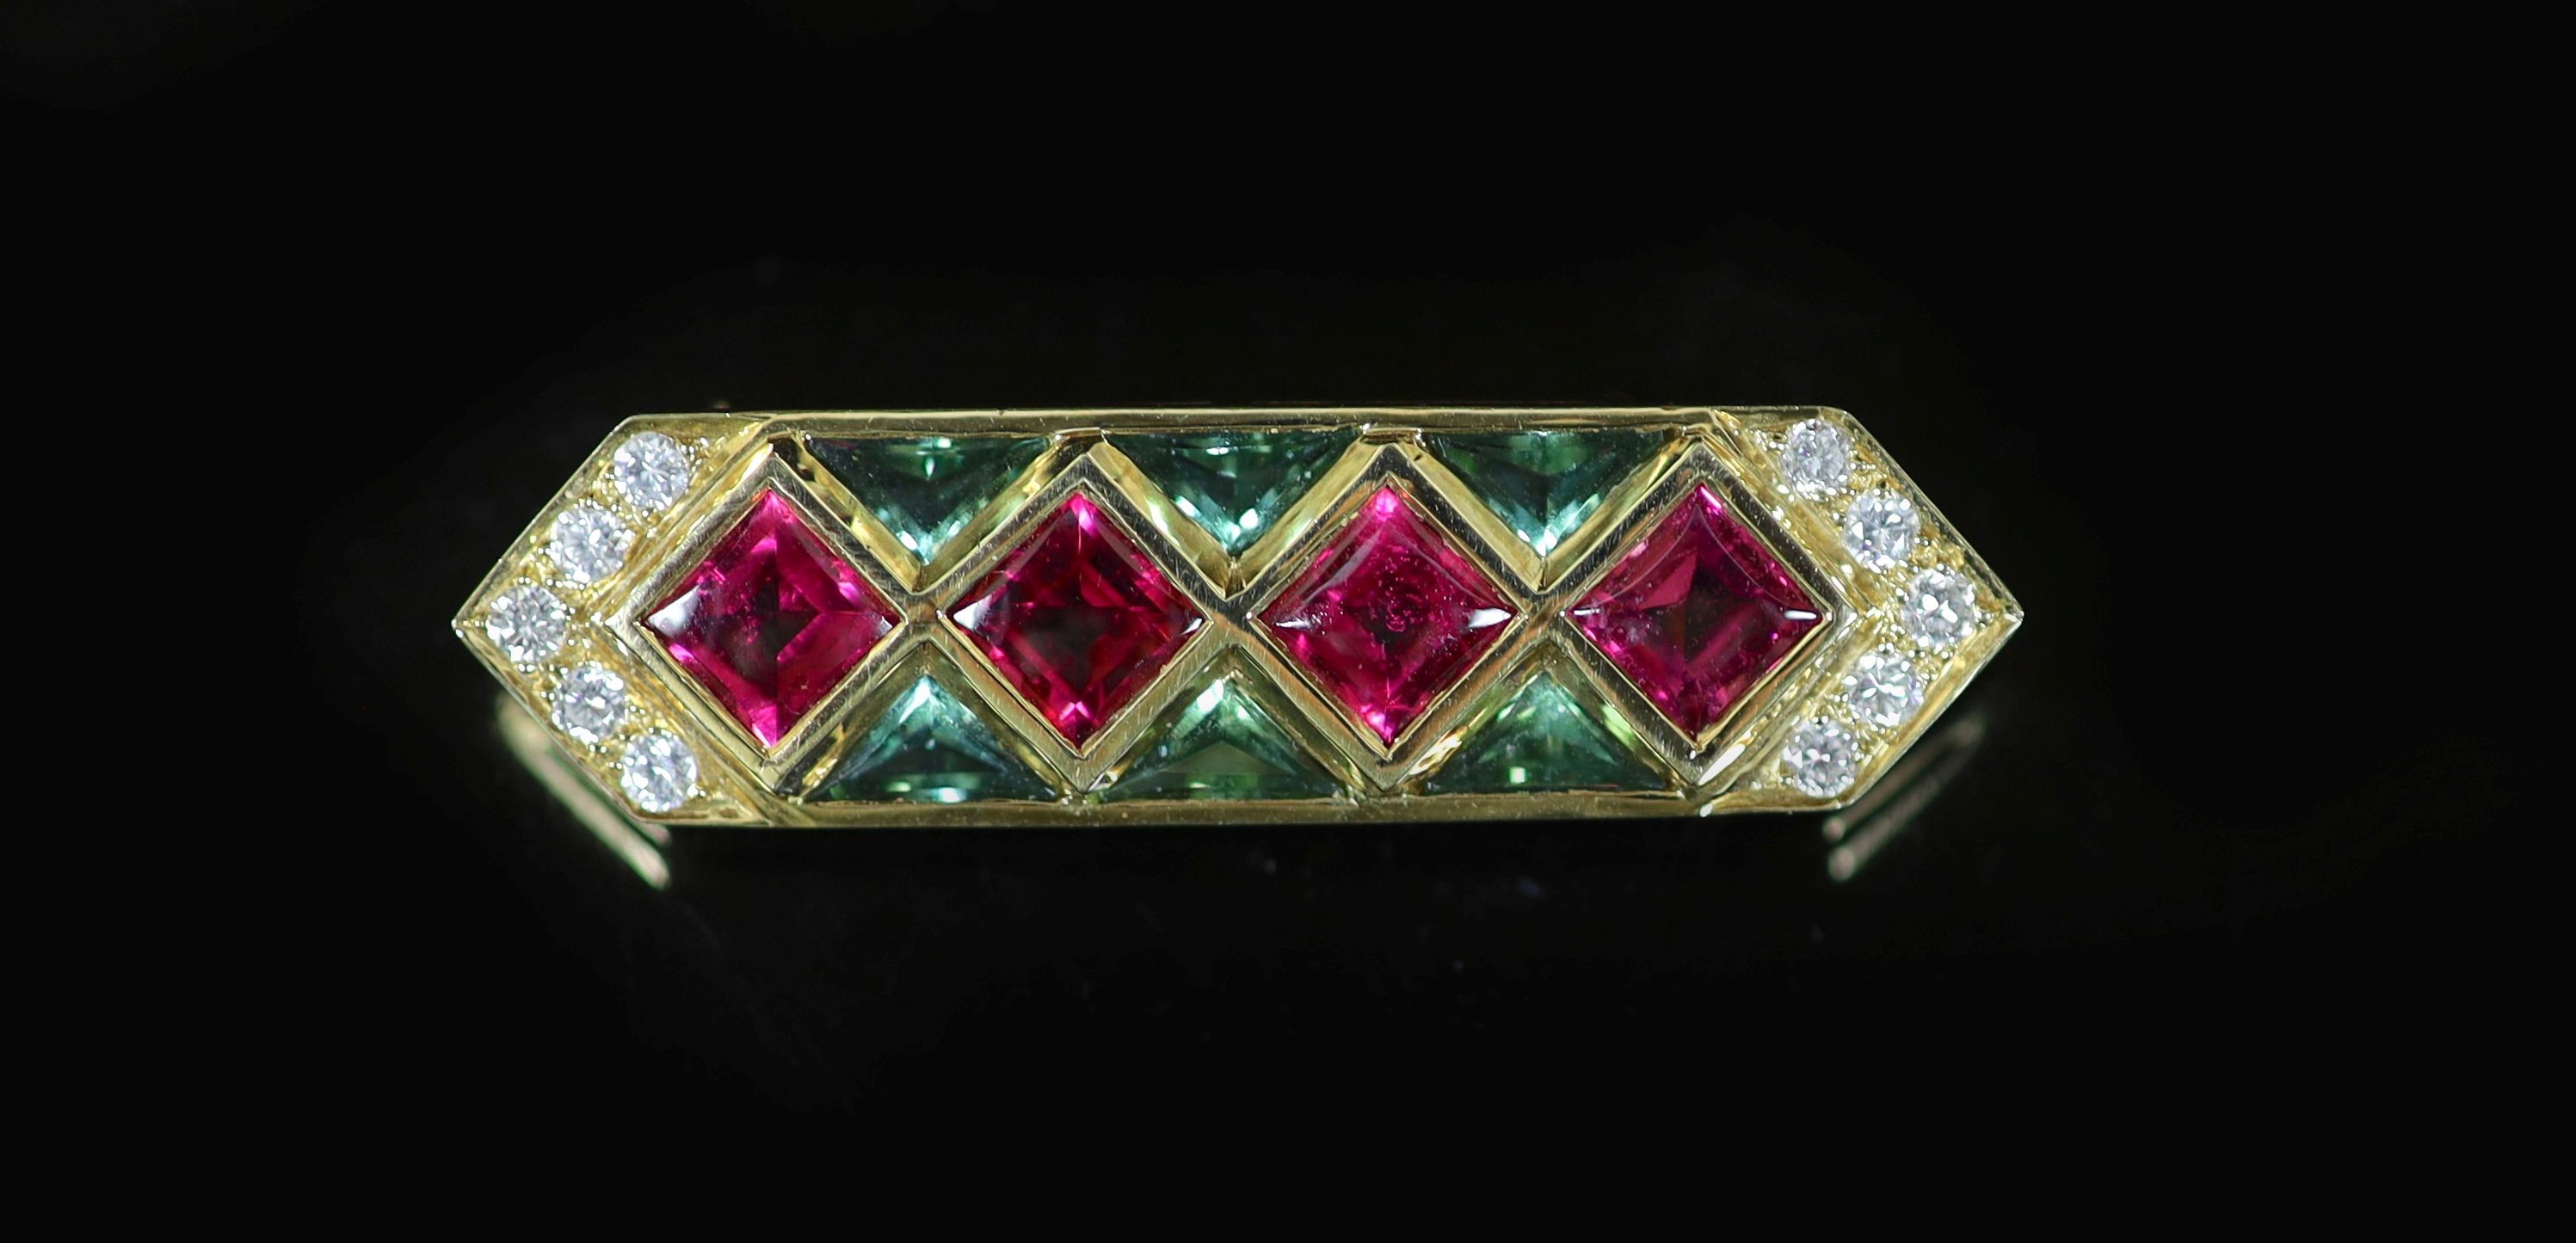 A 20th century Continental 18ct gold, two colour tourmaline? and diamond set bar brooch